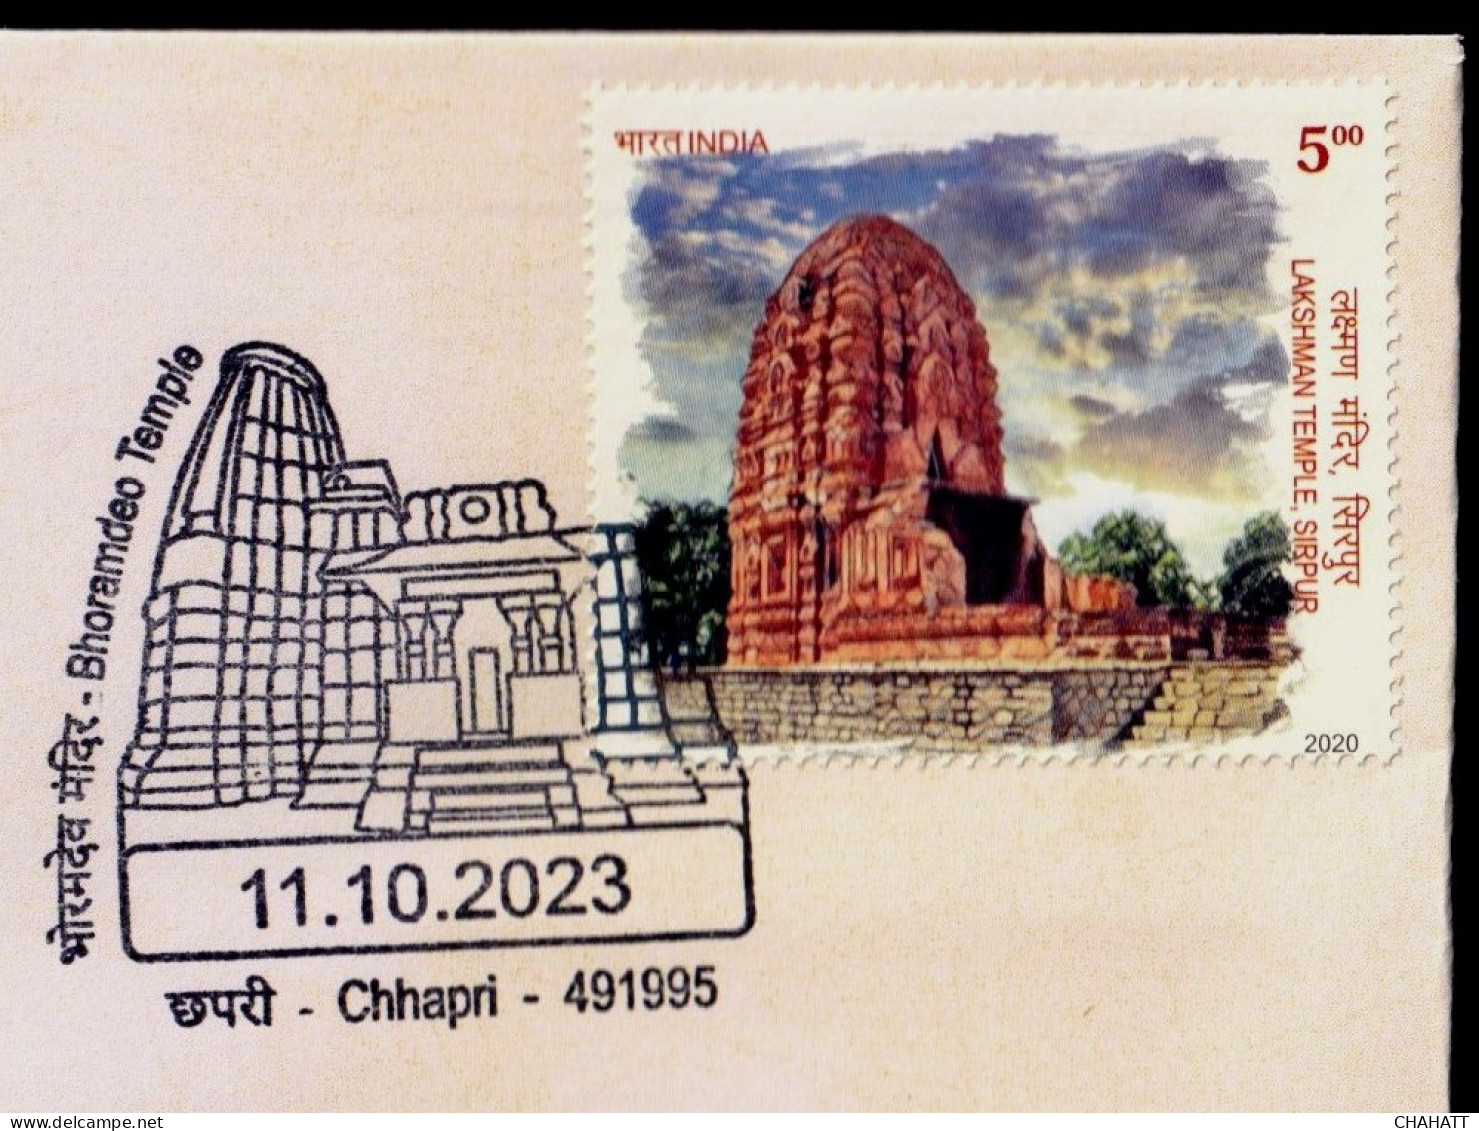 HINDUISM- BHORAMDEO TEMPLE- PERMANENT CACHET- INDIA POST, RAIPUR GPO-CG CIRCLE-LIMITED ISSUE-BX4-29 - Hindoeïsme